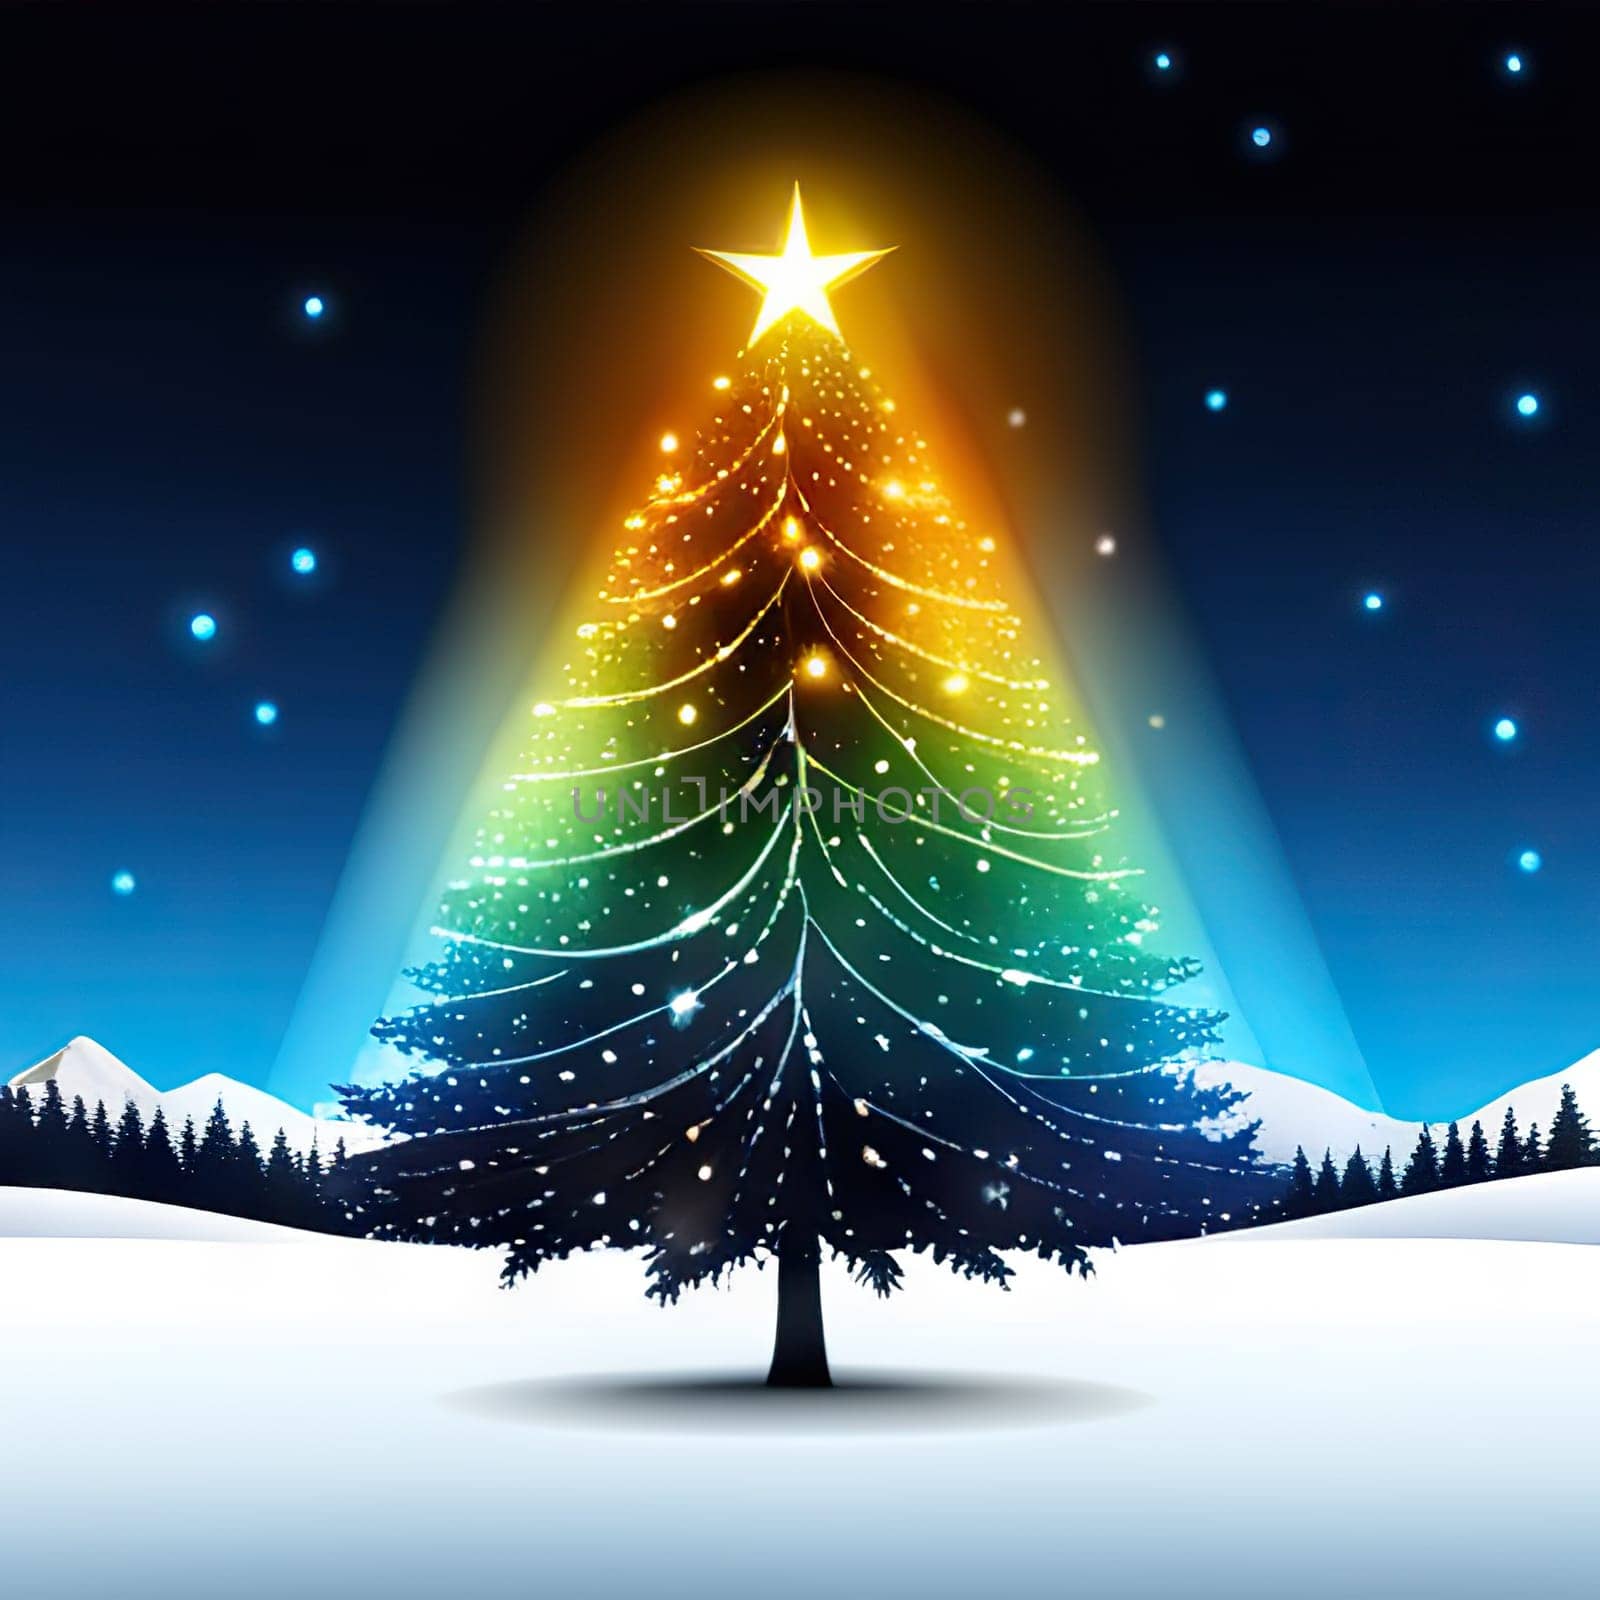 Christmas tree with xmas decorations. Merry Christmas and happy new year. Happy holidays logo.